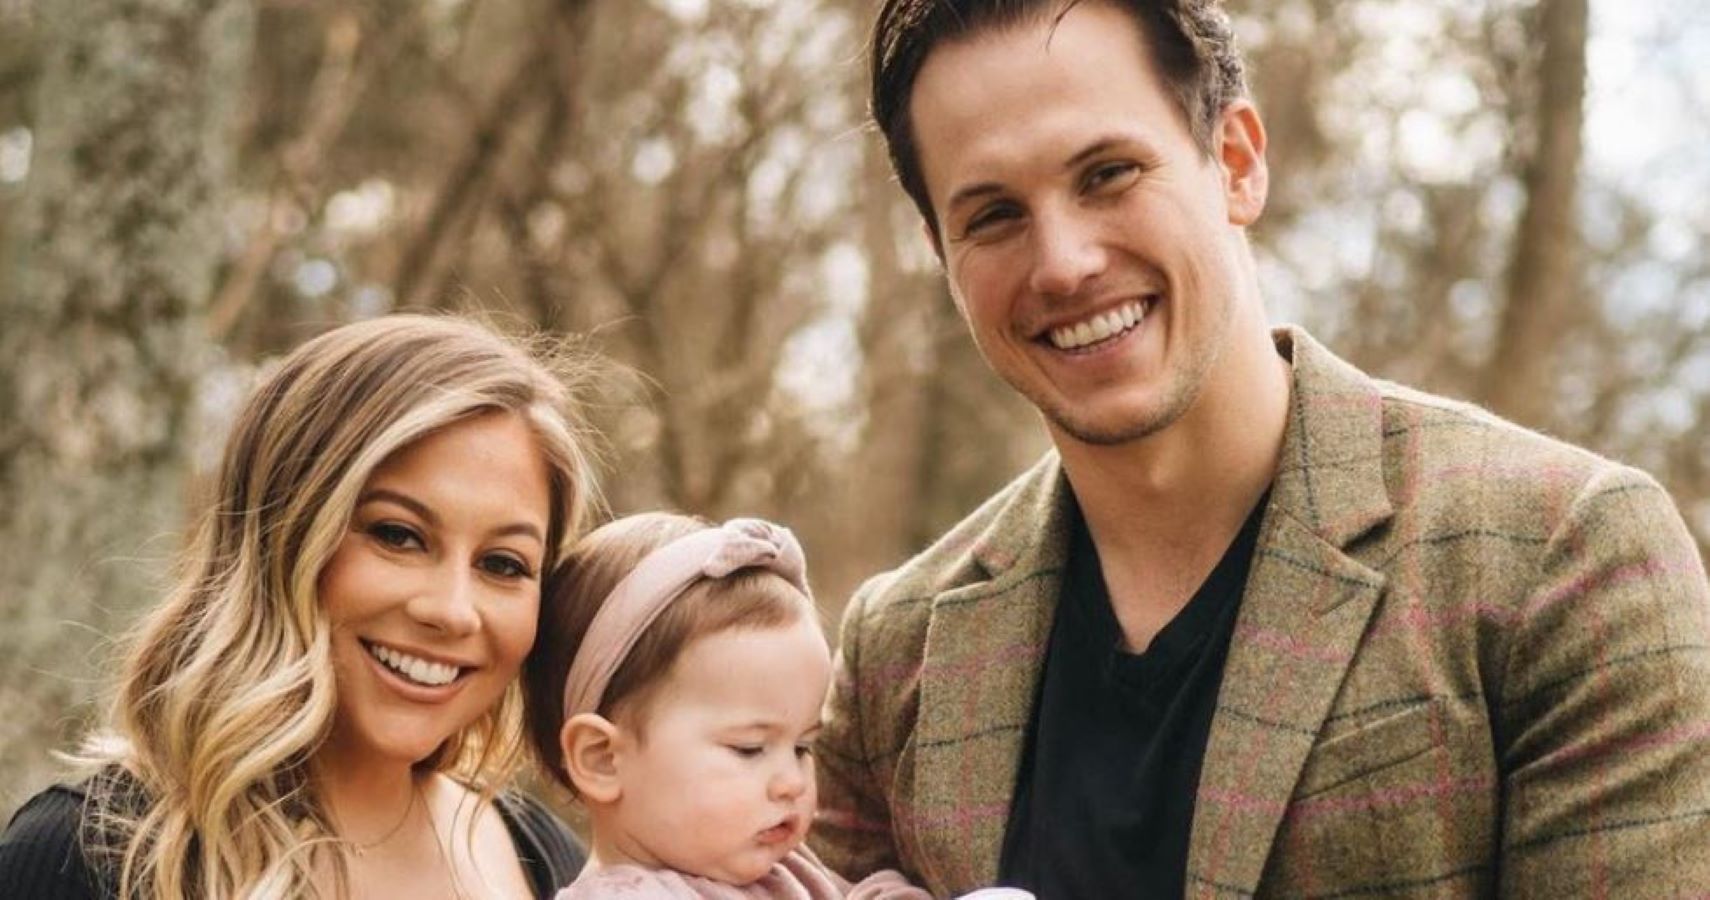 Shawn Johnson and Andrew East expecting second child